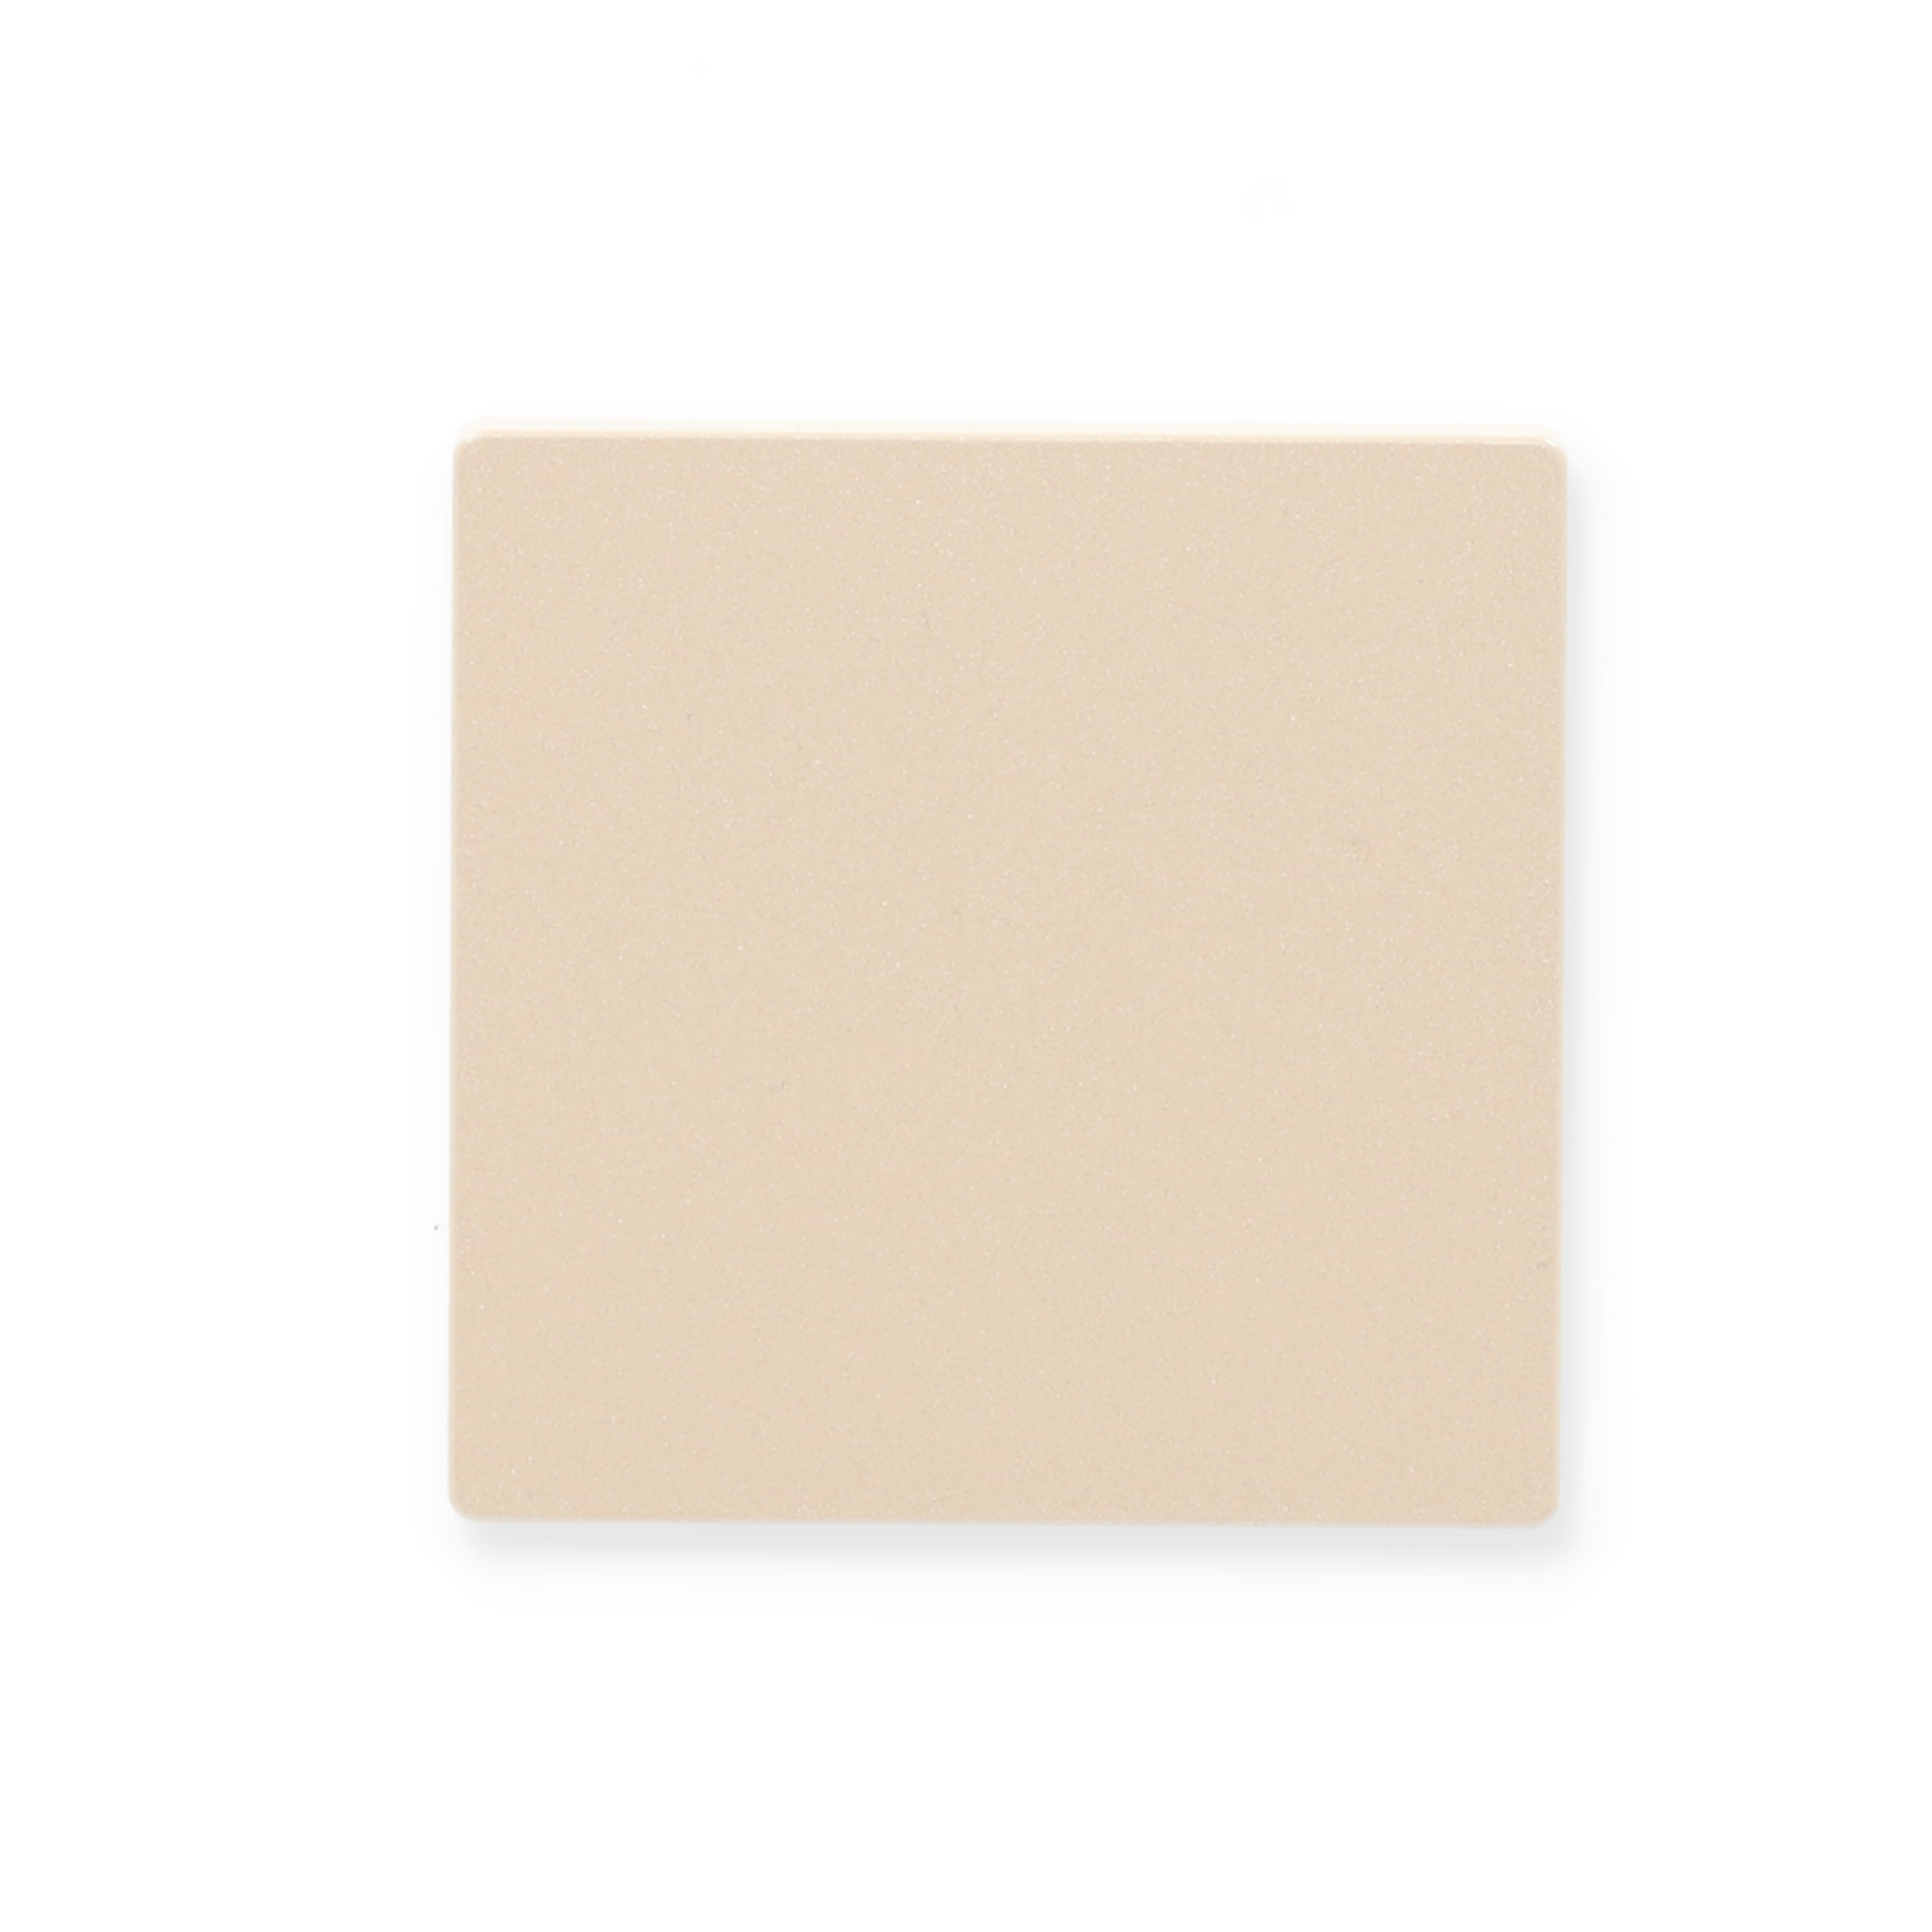 Wippe beige 7,1 x 7,1 cm + product picture